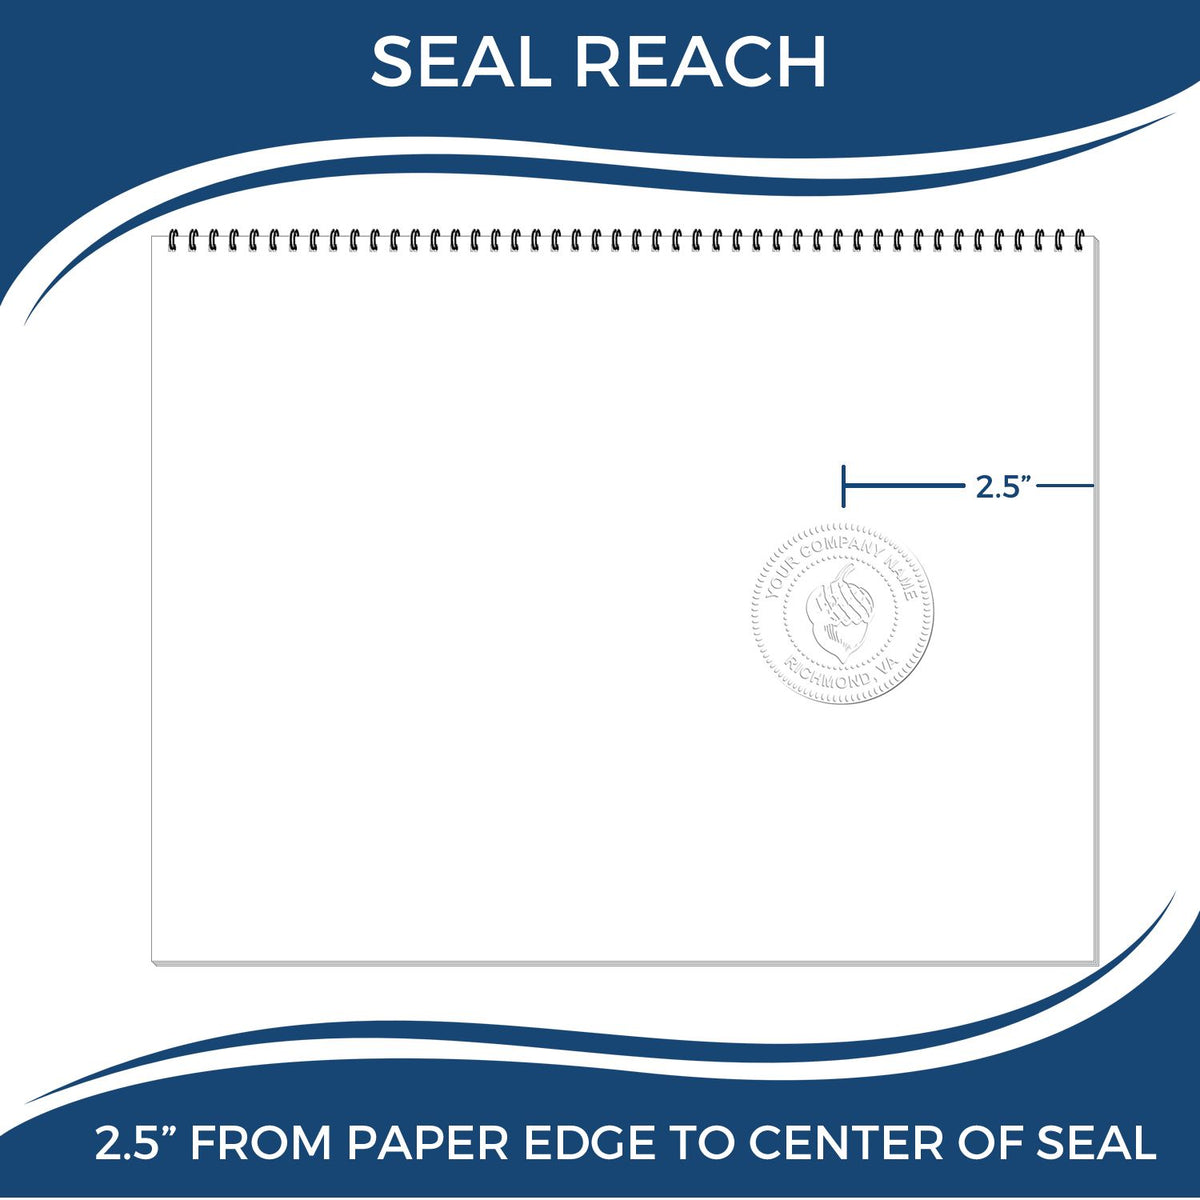 An infographic showing the seal reach which is represented by a ruler and a miniature seal image of the Heavy Duty Cast Iron New Jersey Architect Embosser